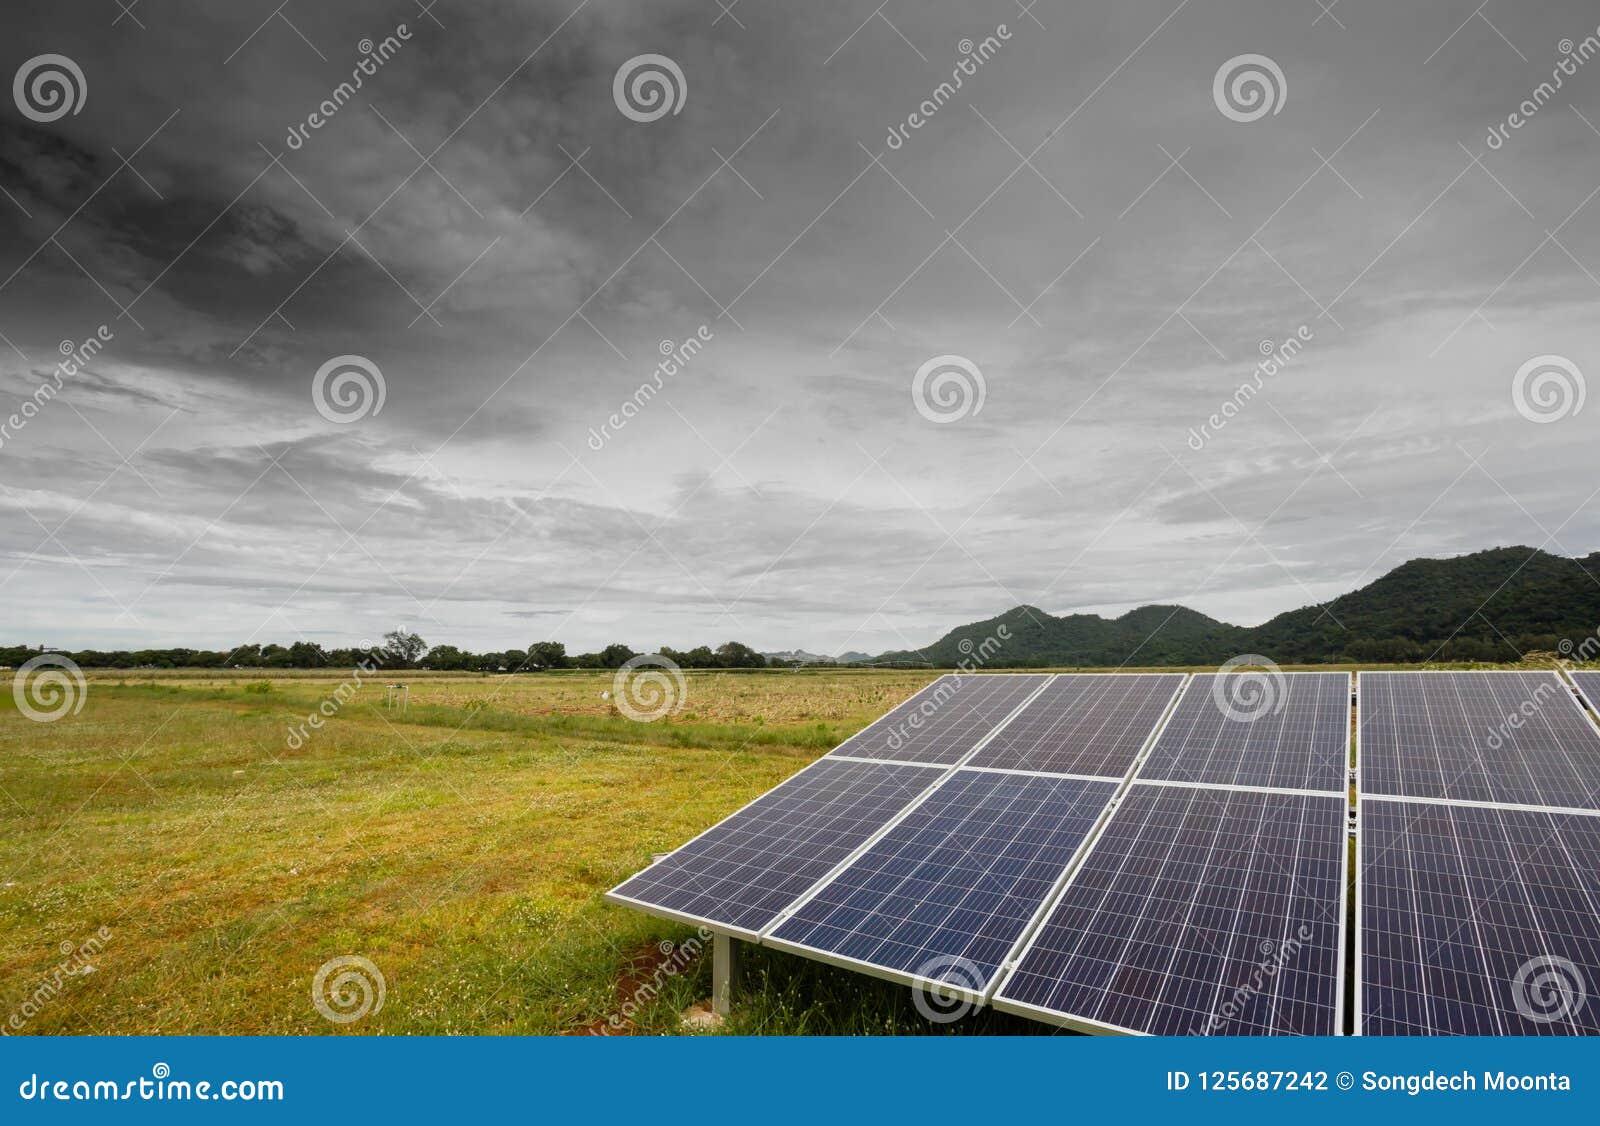 solar cell for agricultural plots